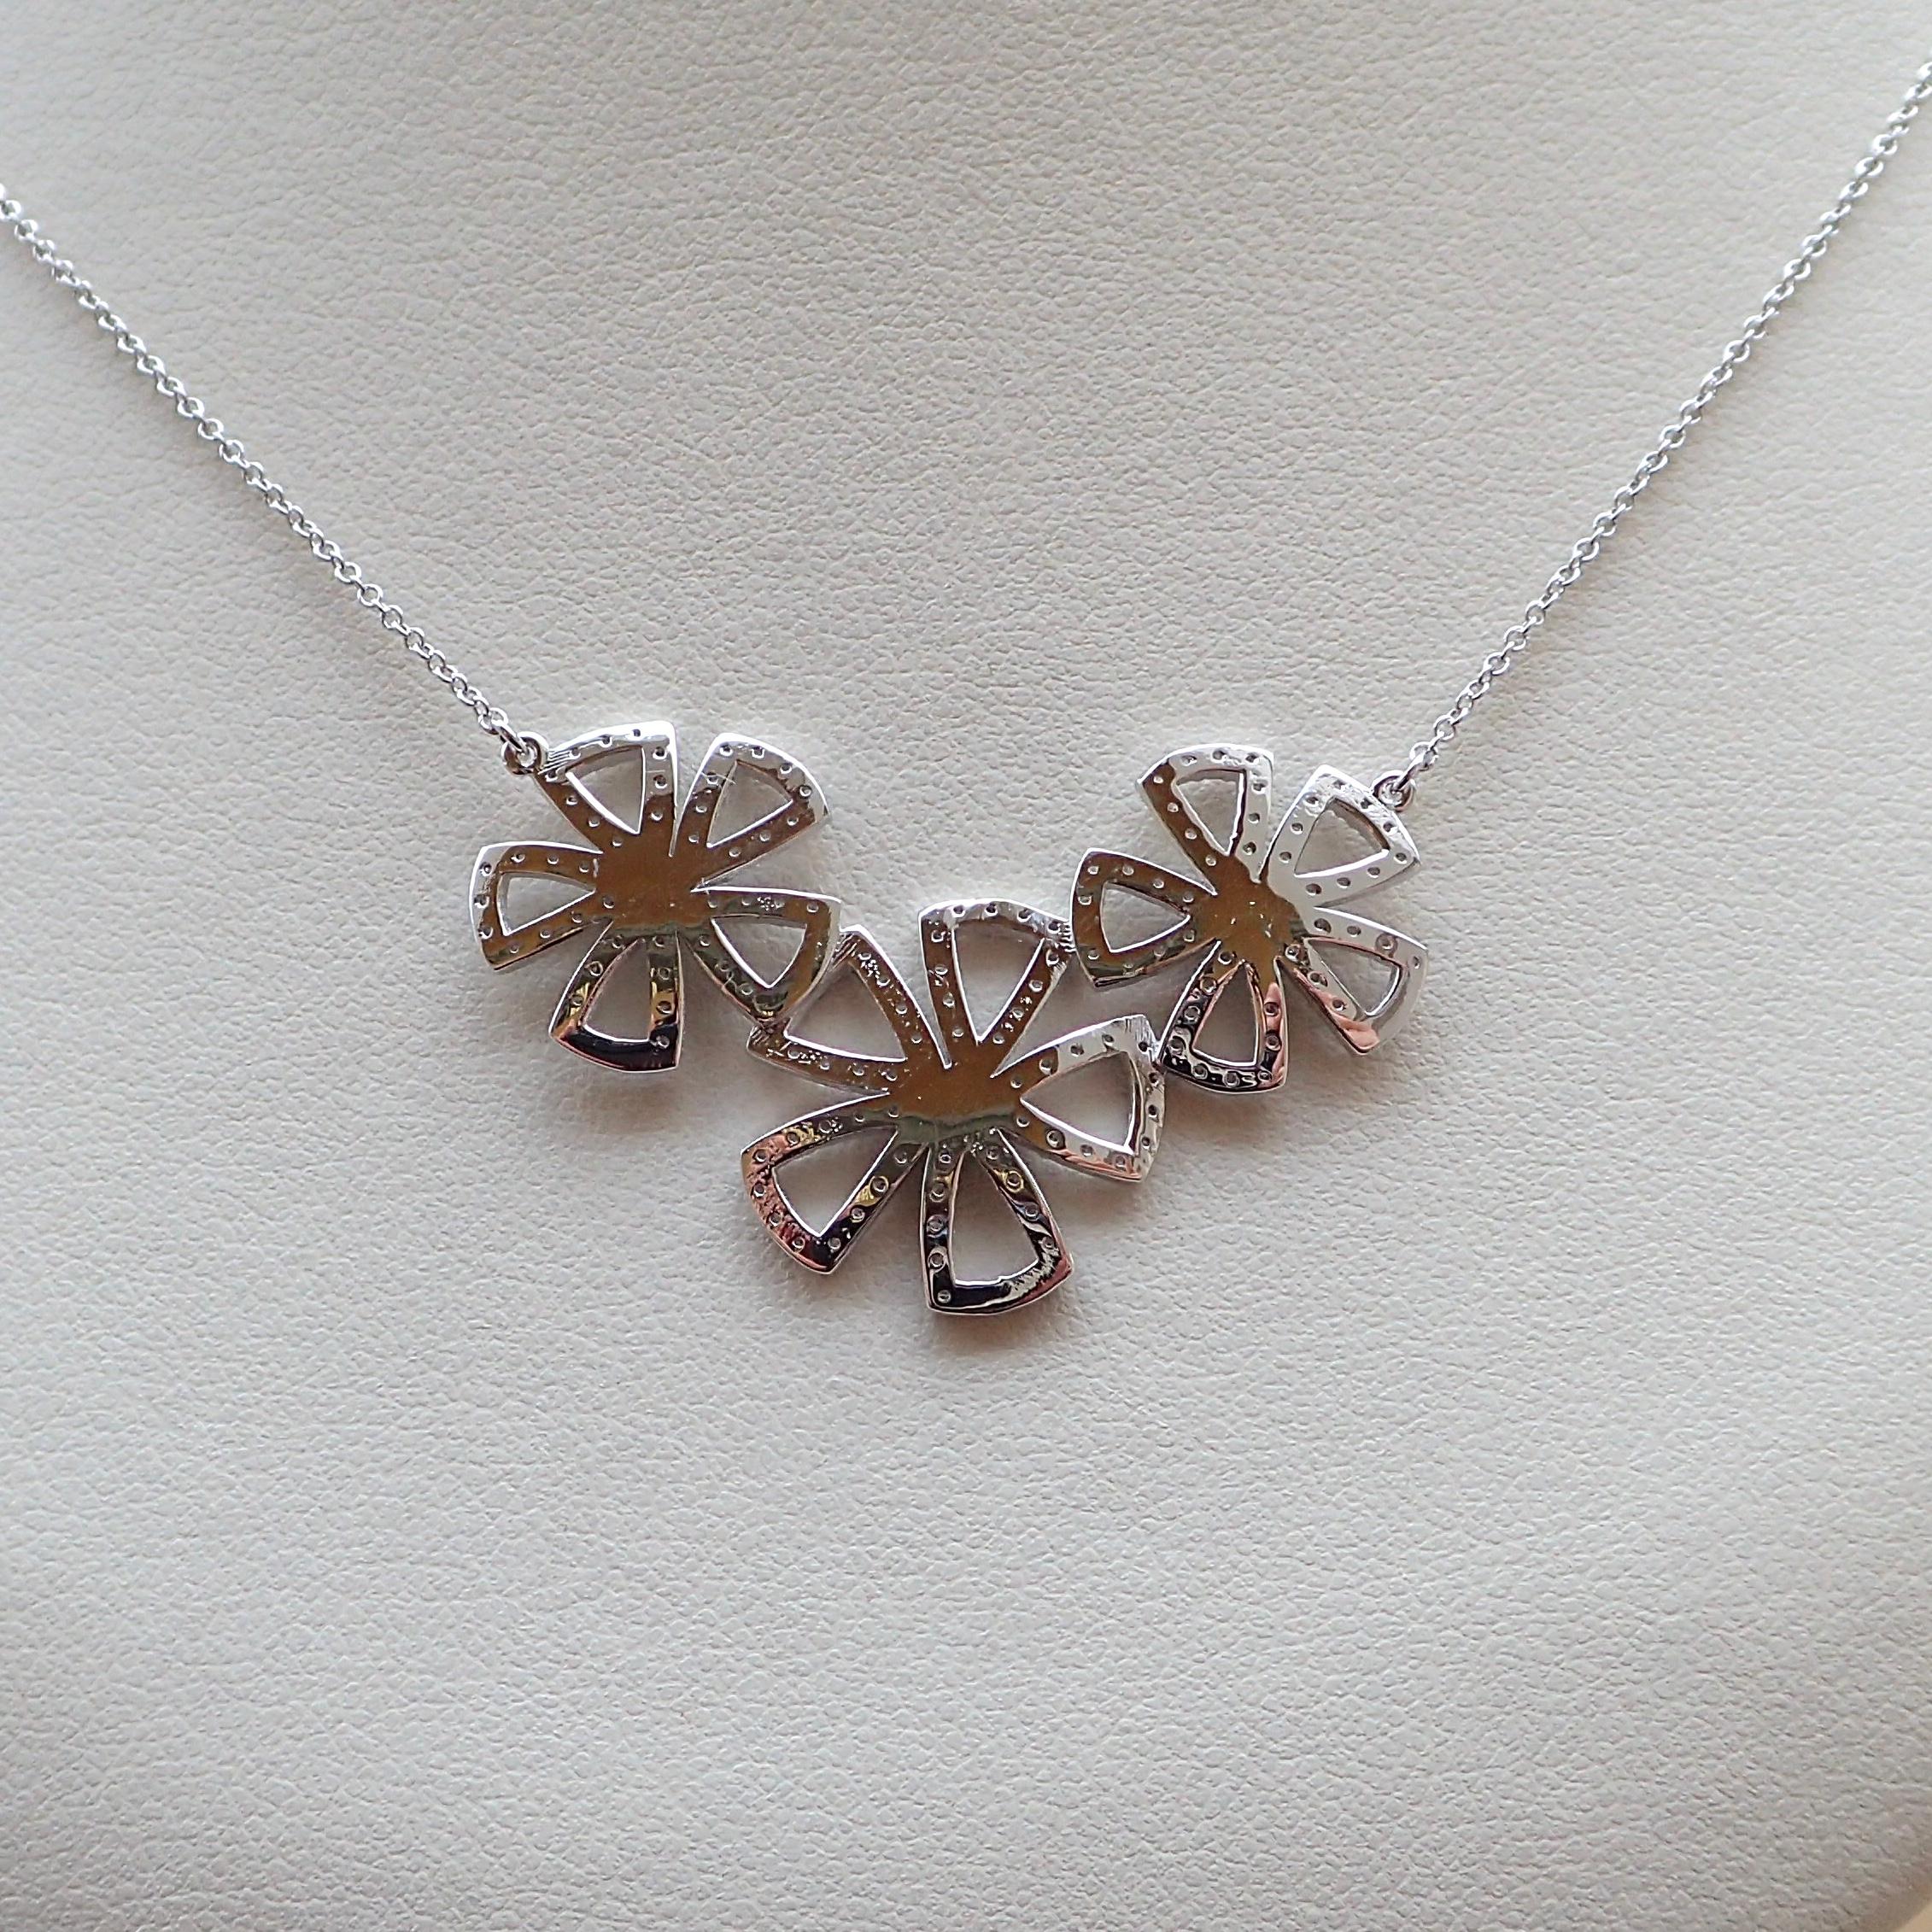 18 Karat Gold Flower Necklace with 1.12 Carat of Diamond, Botanical Collection For Sale 2